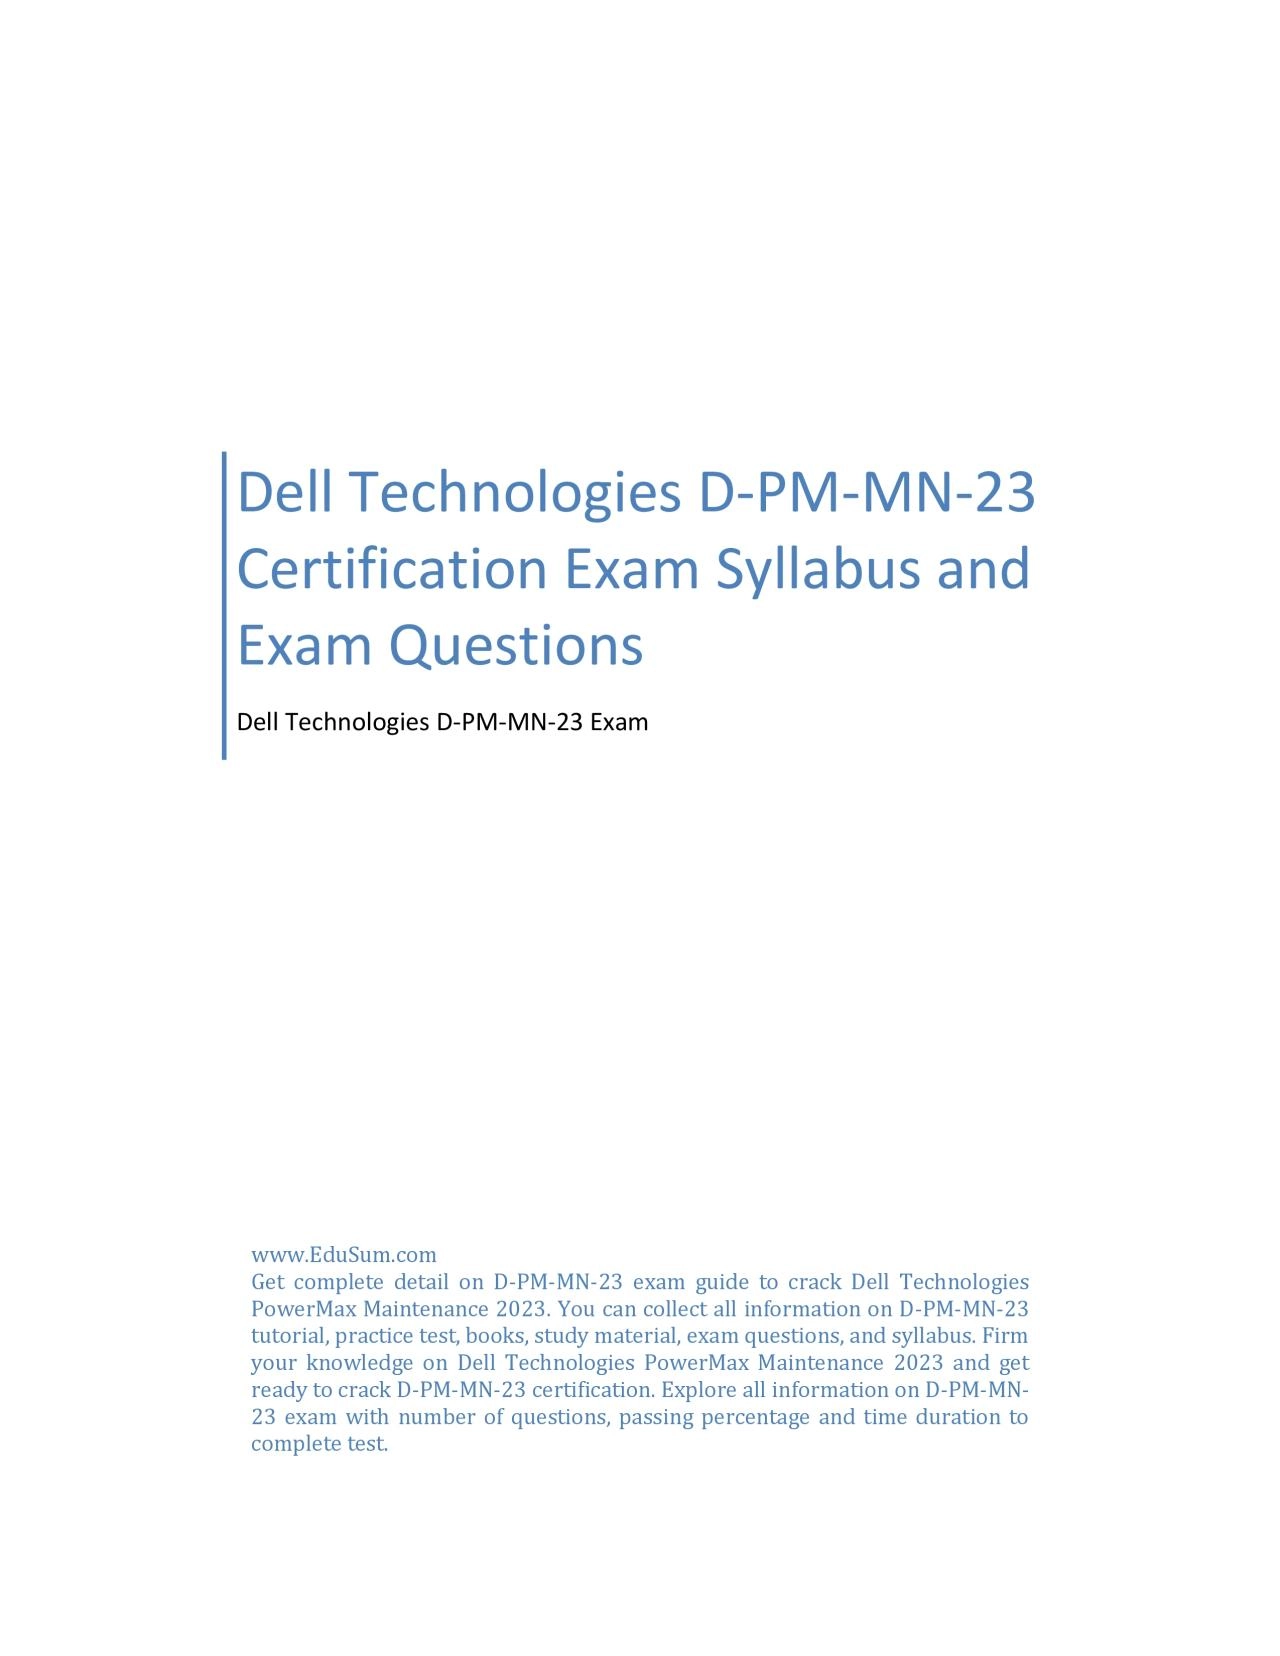 Dell Technologies D-PM-MN-23 Certification Exam Syllabus and Exam Questions